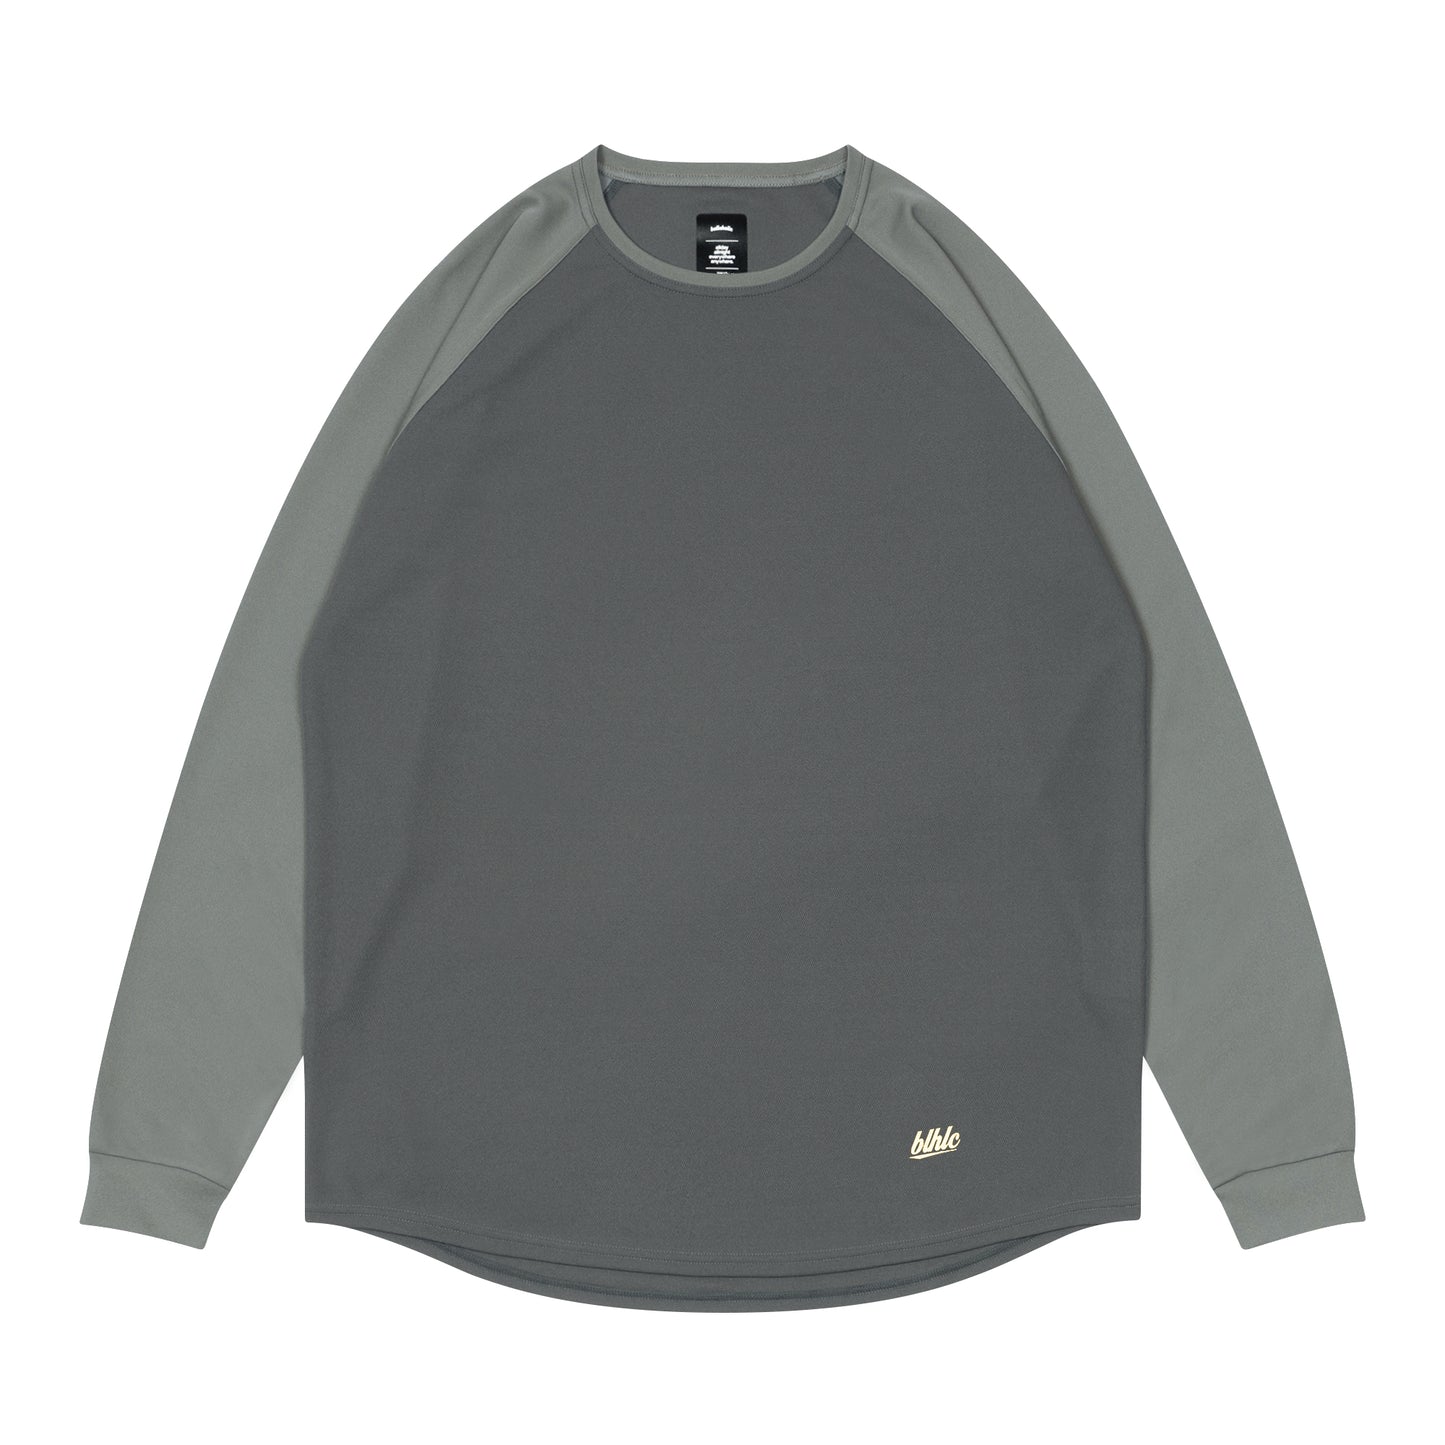 2 Tone blhlc Cool Long Tee (charcoal gray)